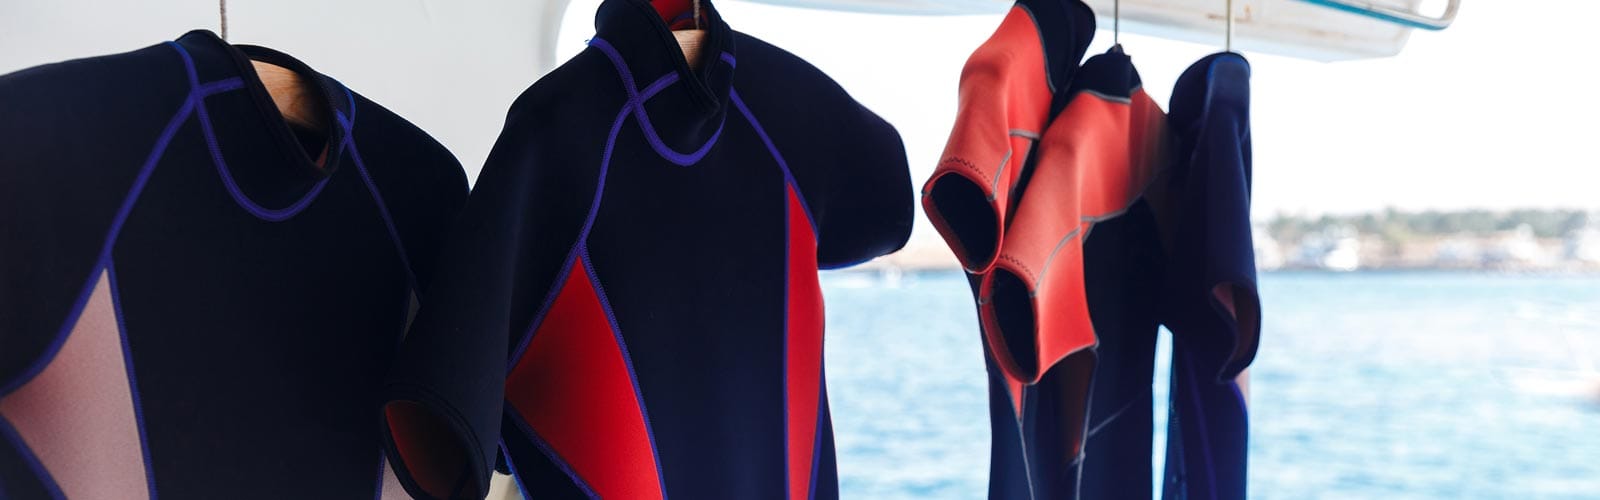 How to Buy a Wetsuit